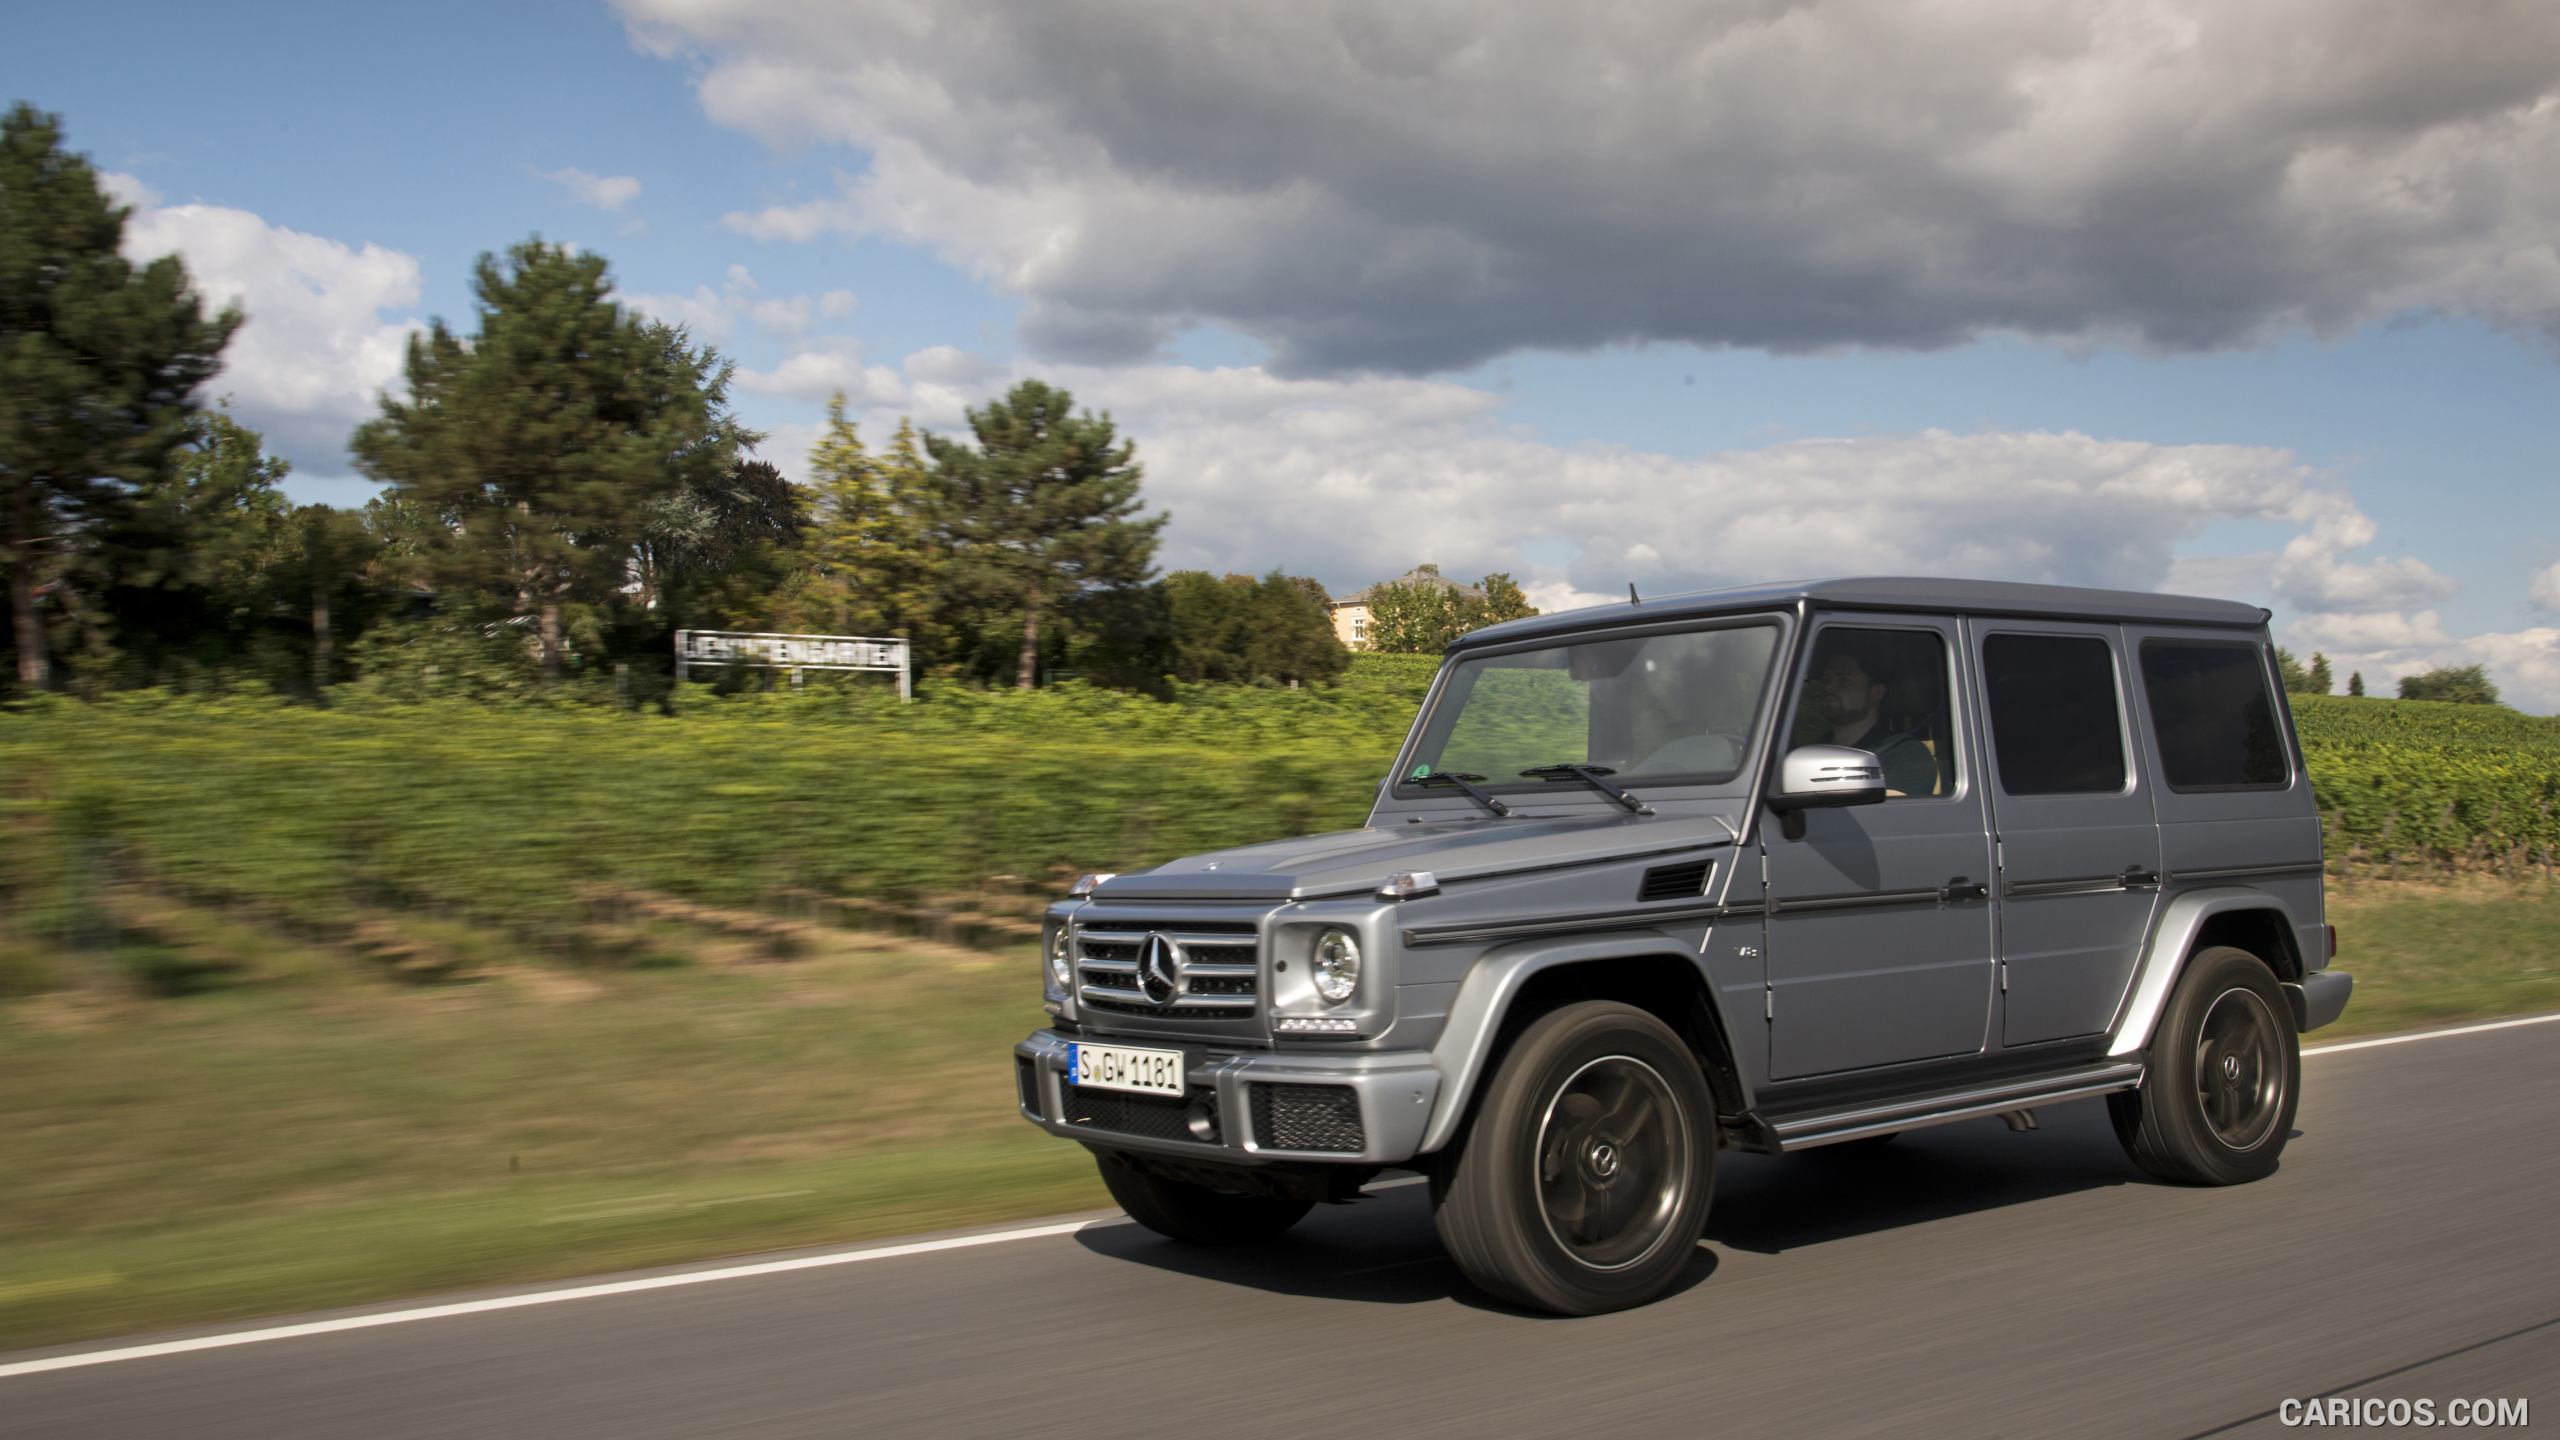 2016 Mercedes-Benz G-Class G500 in Designo Platin Magno - Front, #14 of 131